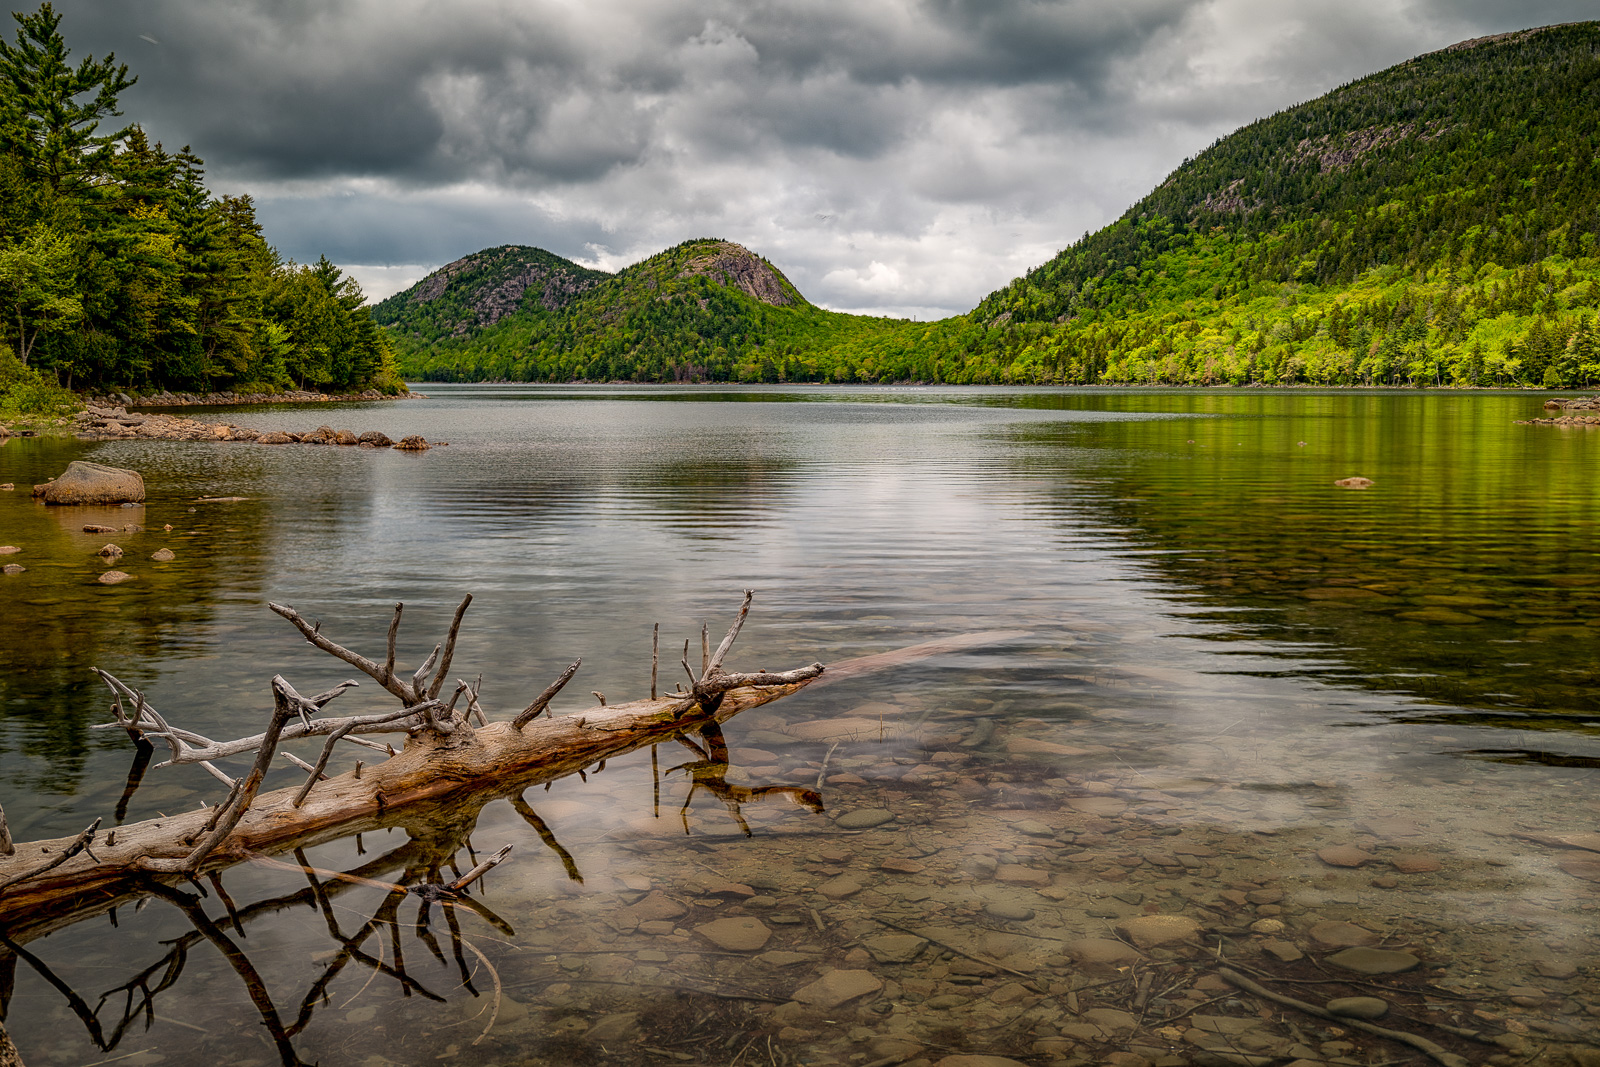 When I visit Jordan Pond I usually 'focus' on the boulders/rocks along the edge of the pond for my images. This time that fallen...